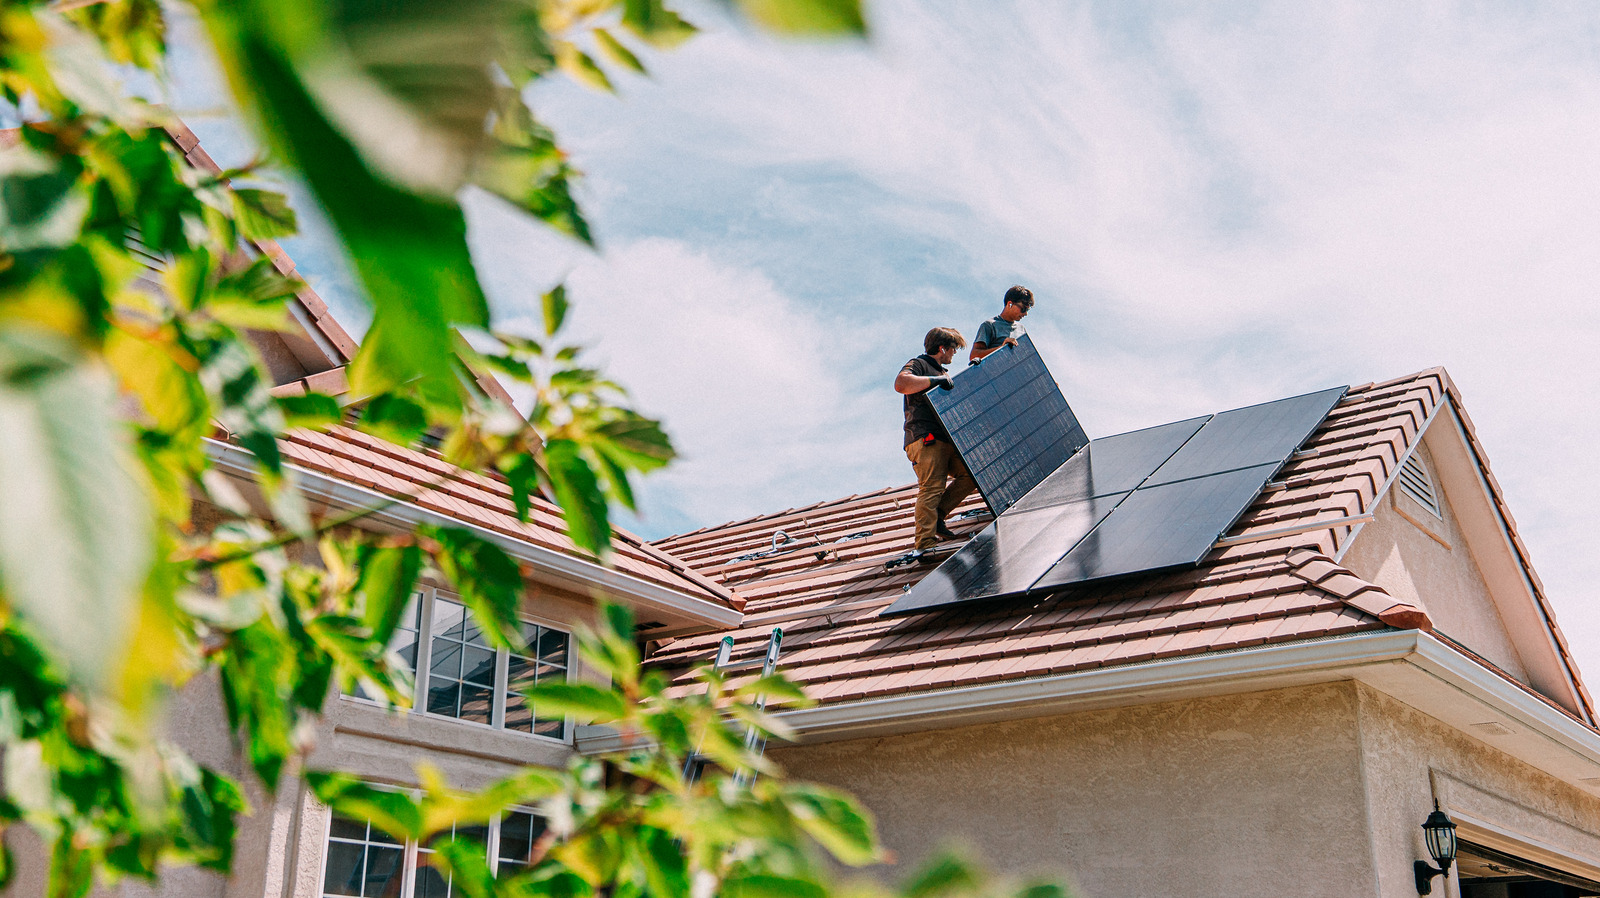 9 Of The Best Home Energy Savings Tactics If You Don't Want To Install Solar Panels